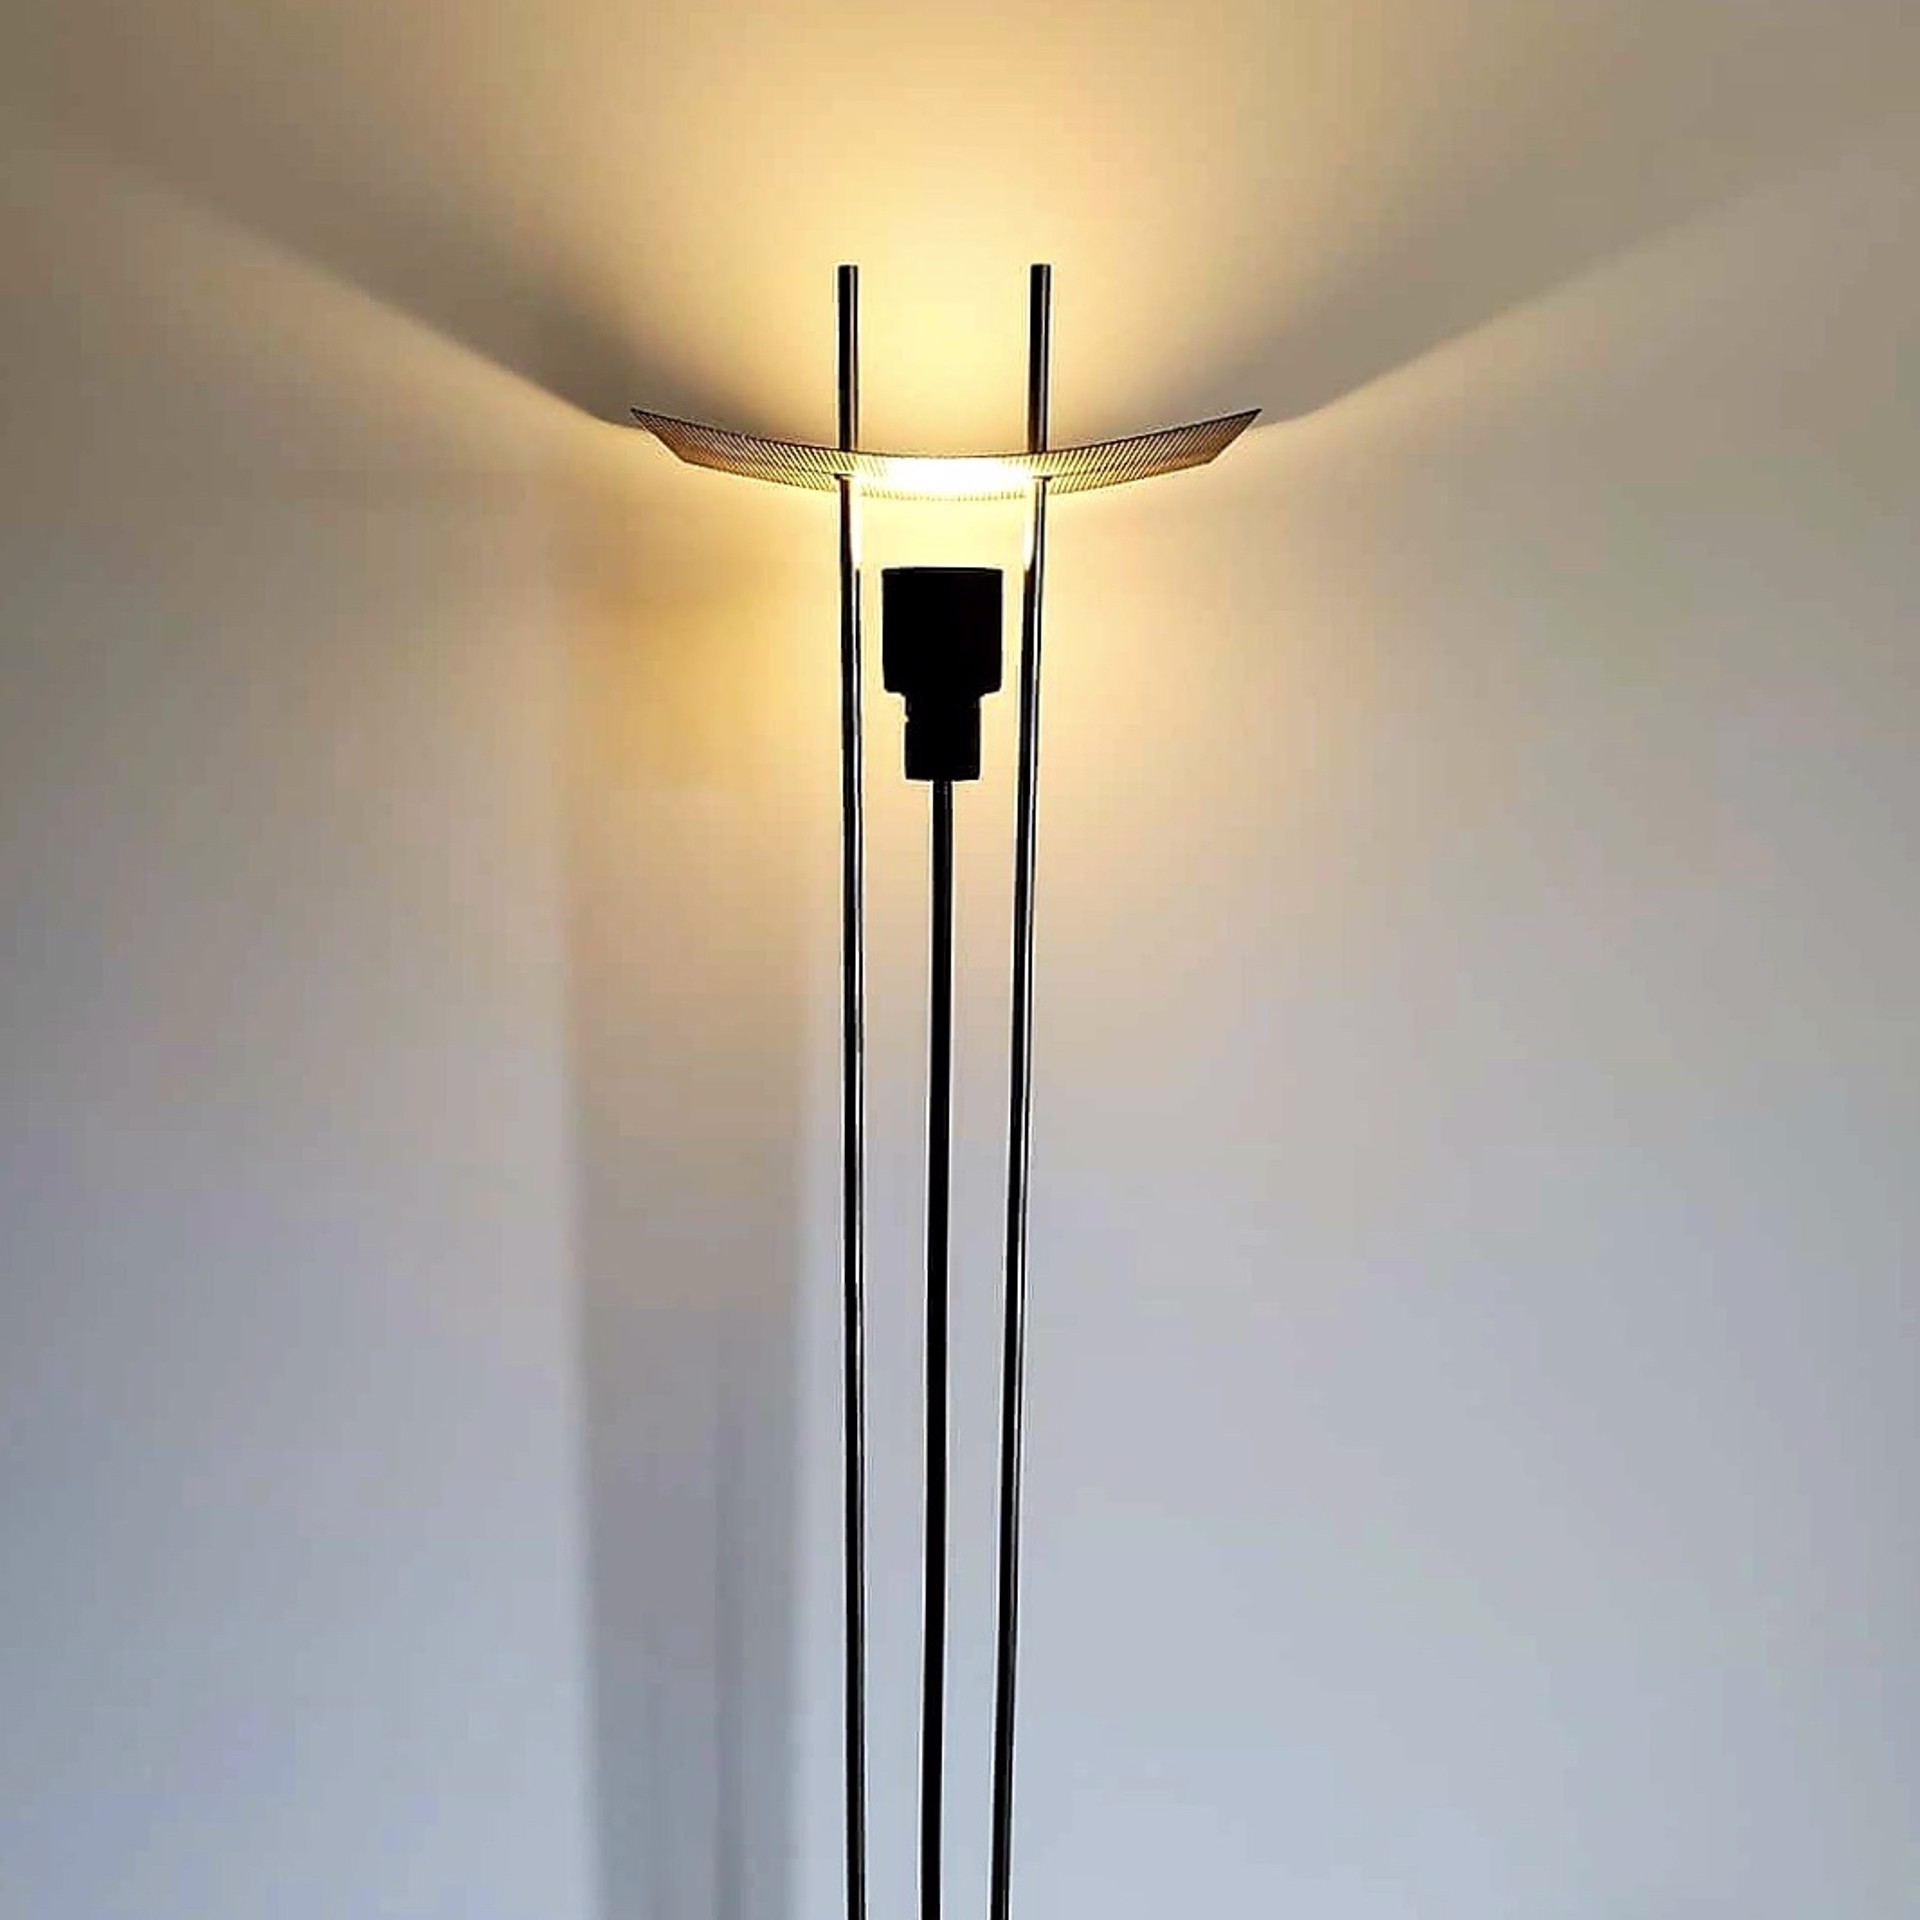 Perf Lamp by James Violette